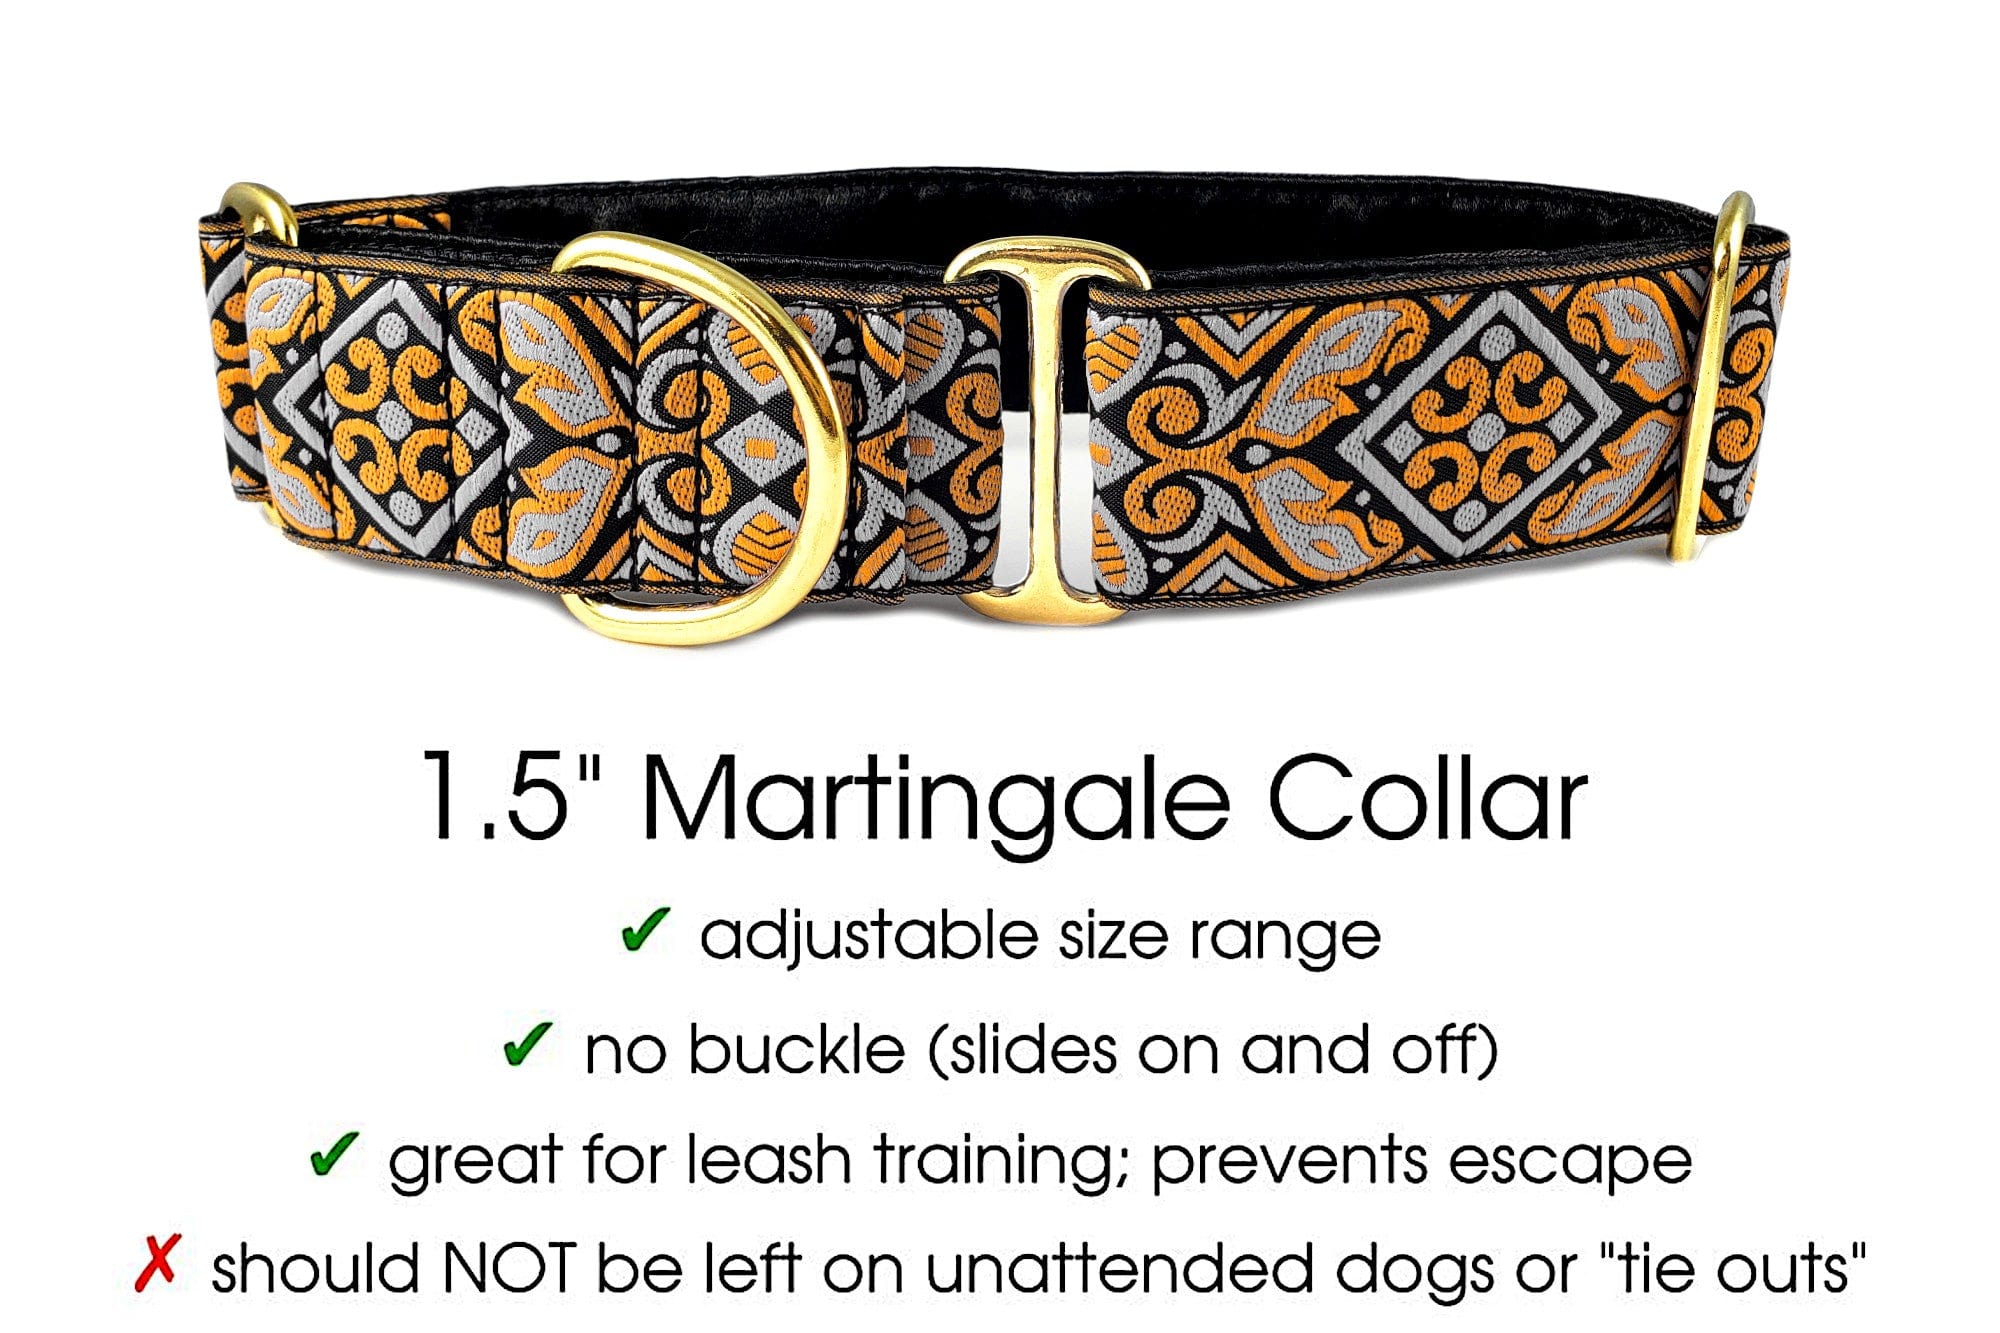 The Hound Haberdashery Collar Cologne in Gray & Old Gold (Non-Metallic) - Martingale Dog Collar or Buckle Dog Collar - 1.5" Width